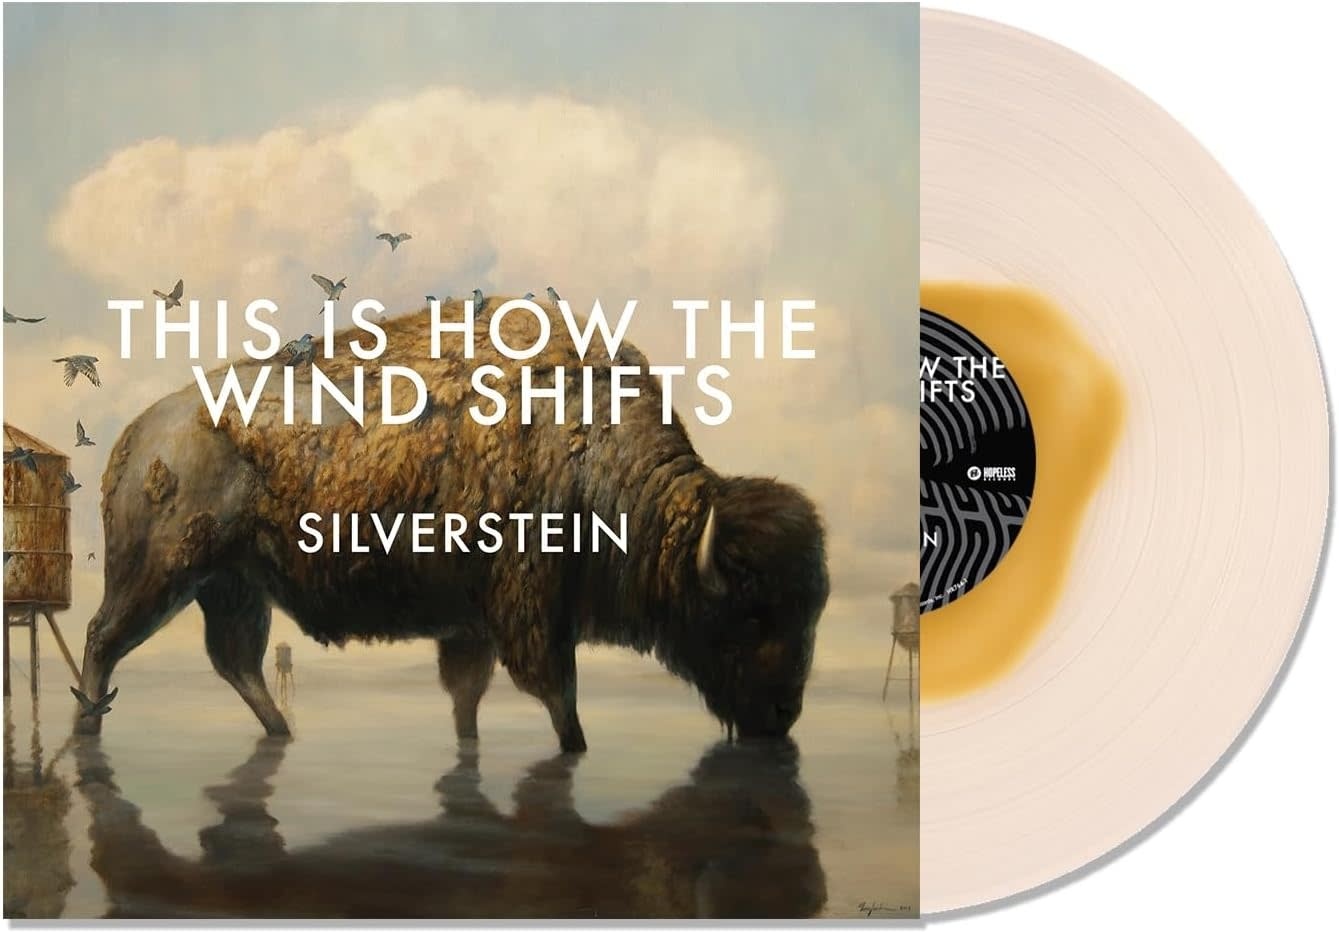 Silverstein – This Is How The Wind Shifts